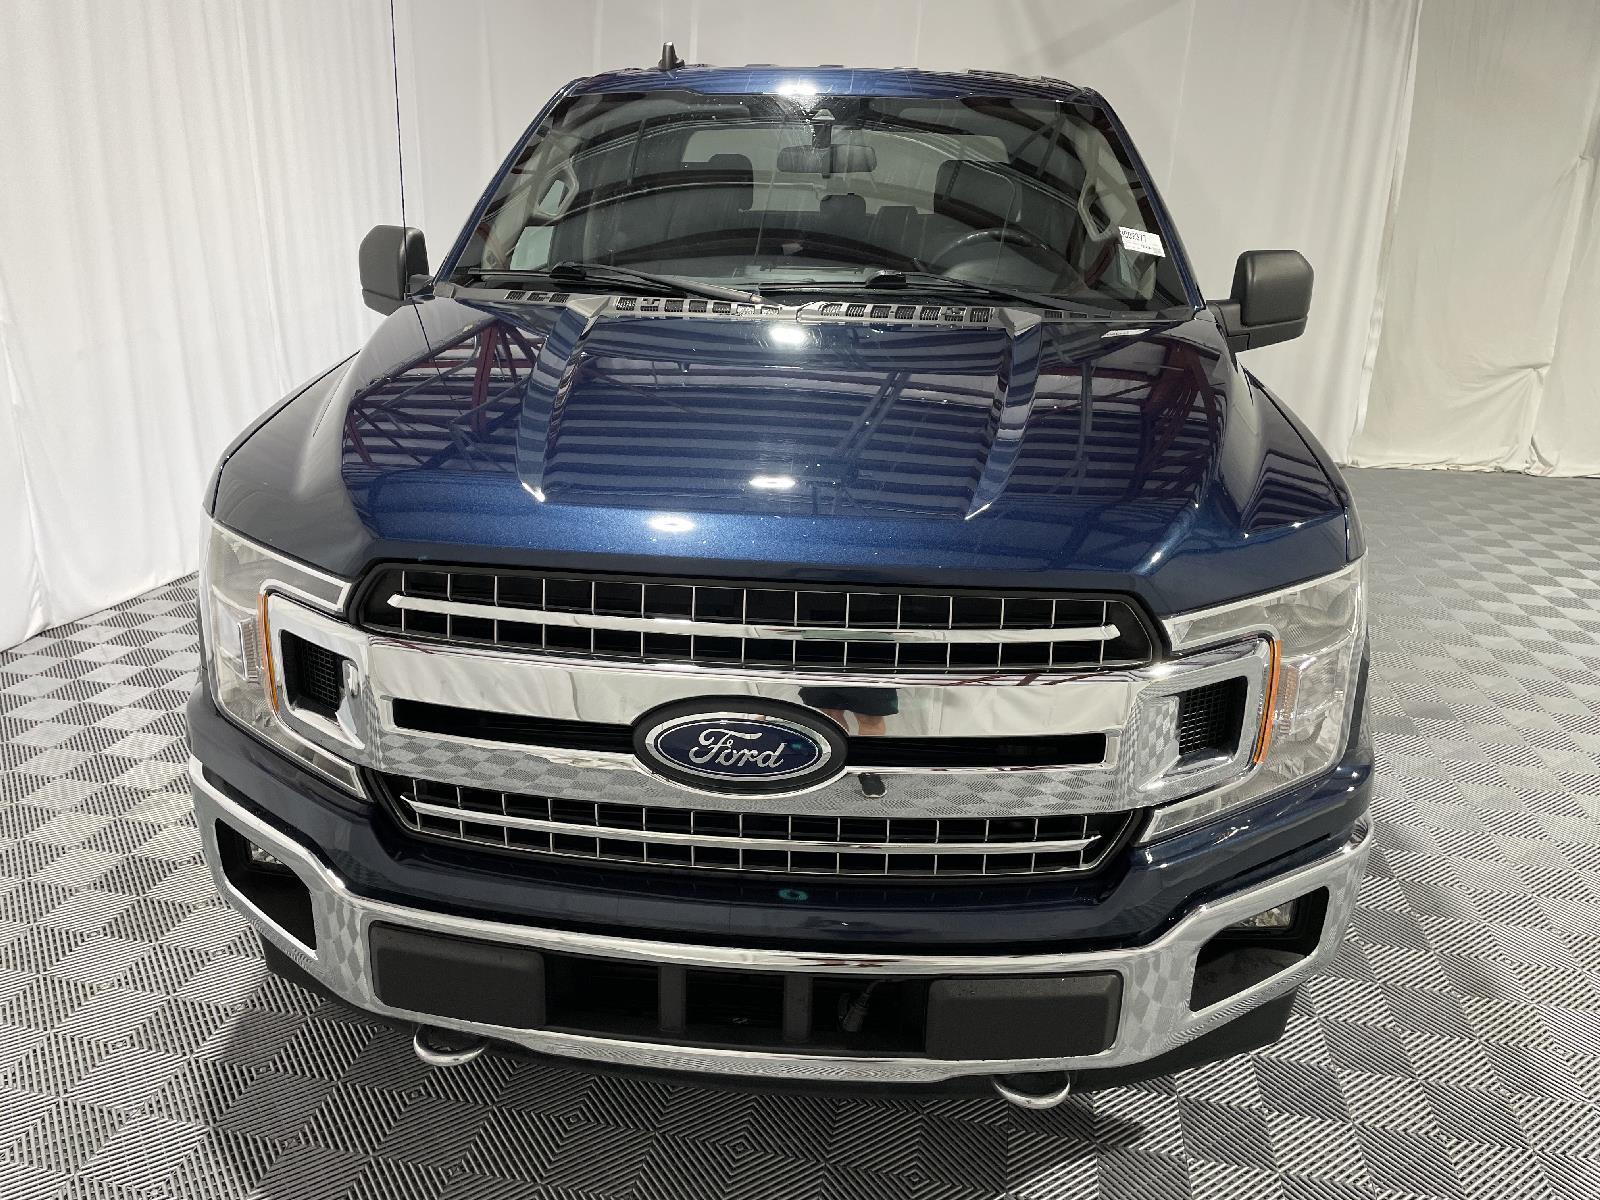 Used 2020 Ford F-150 XLT Crew Cab Truck for sale in St Joseph MO